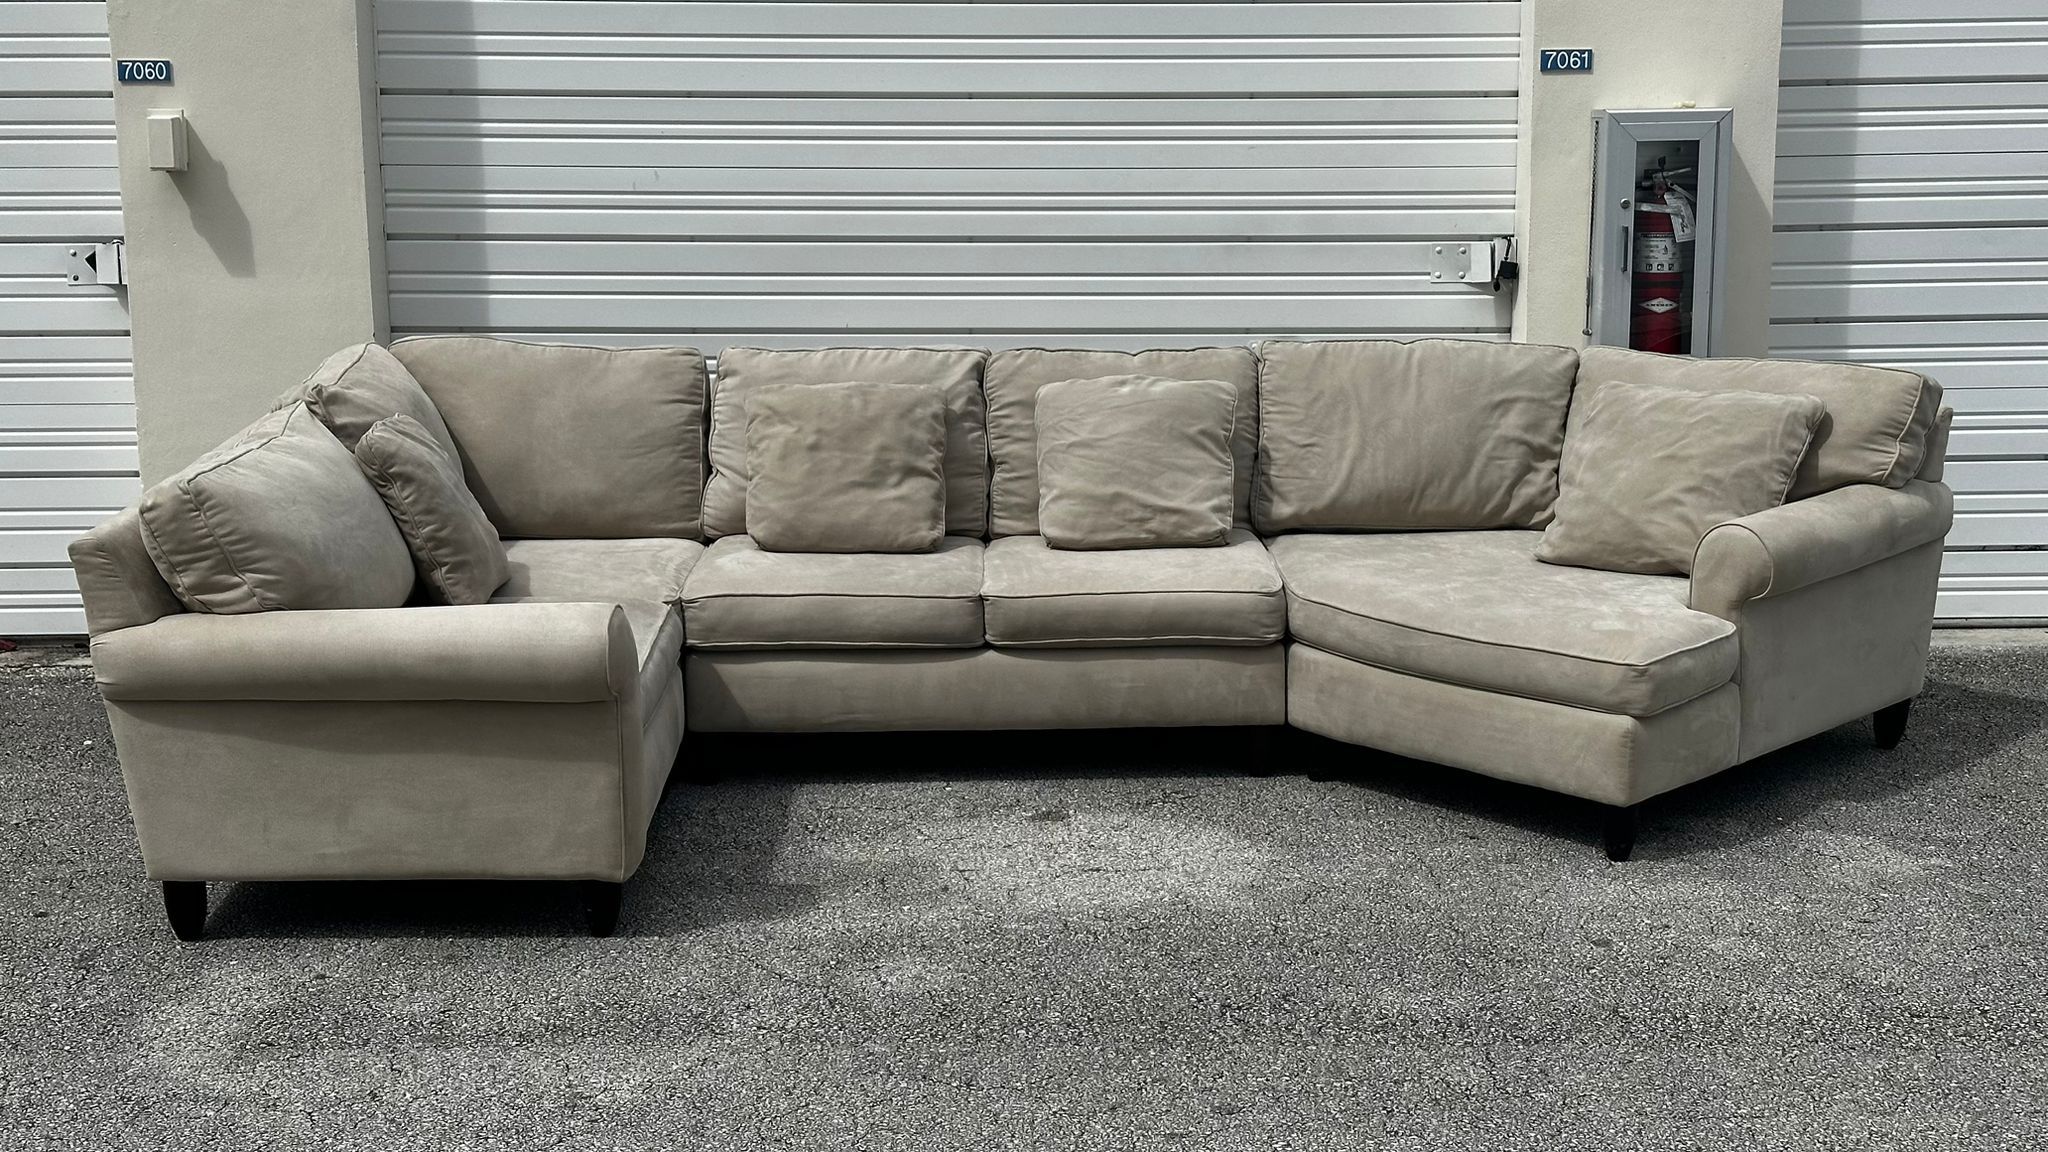 GRAYISH MICROFIBER SECTIONAL SOFA by ASHLEY FURNITURE - delivery is negotiable